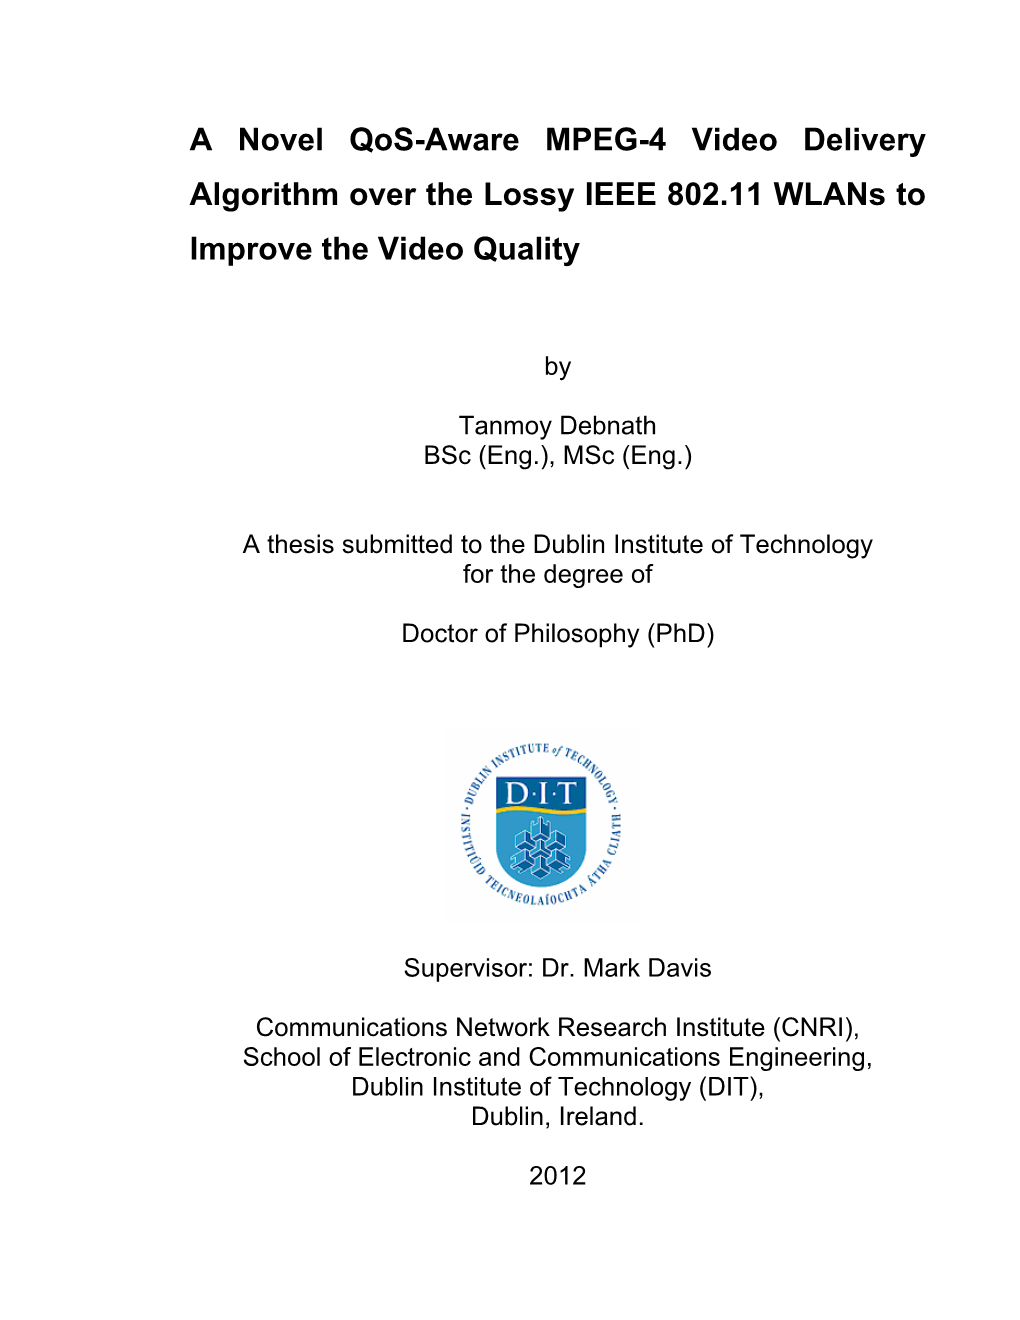 A Novel Qos-Aware MPEG-4 Video Delivery Algorithm Over the Lossy IEEE 802.11 Wlans to Improve the Video Quality